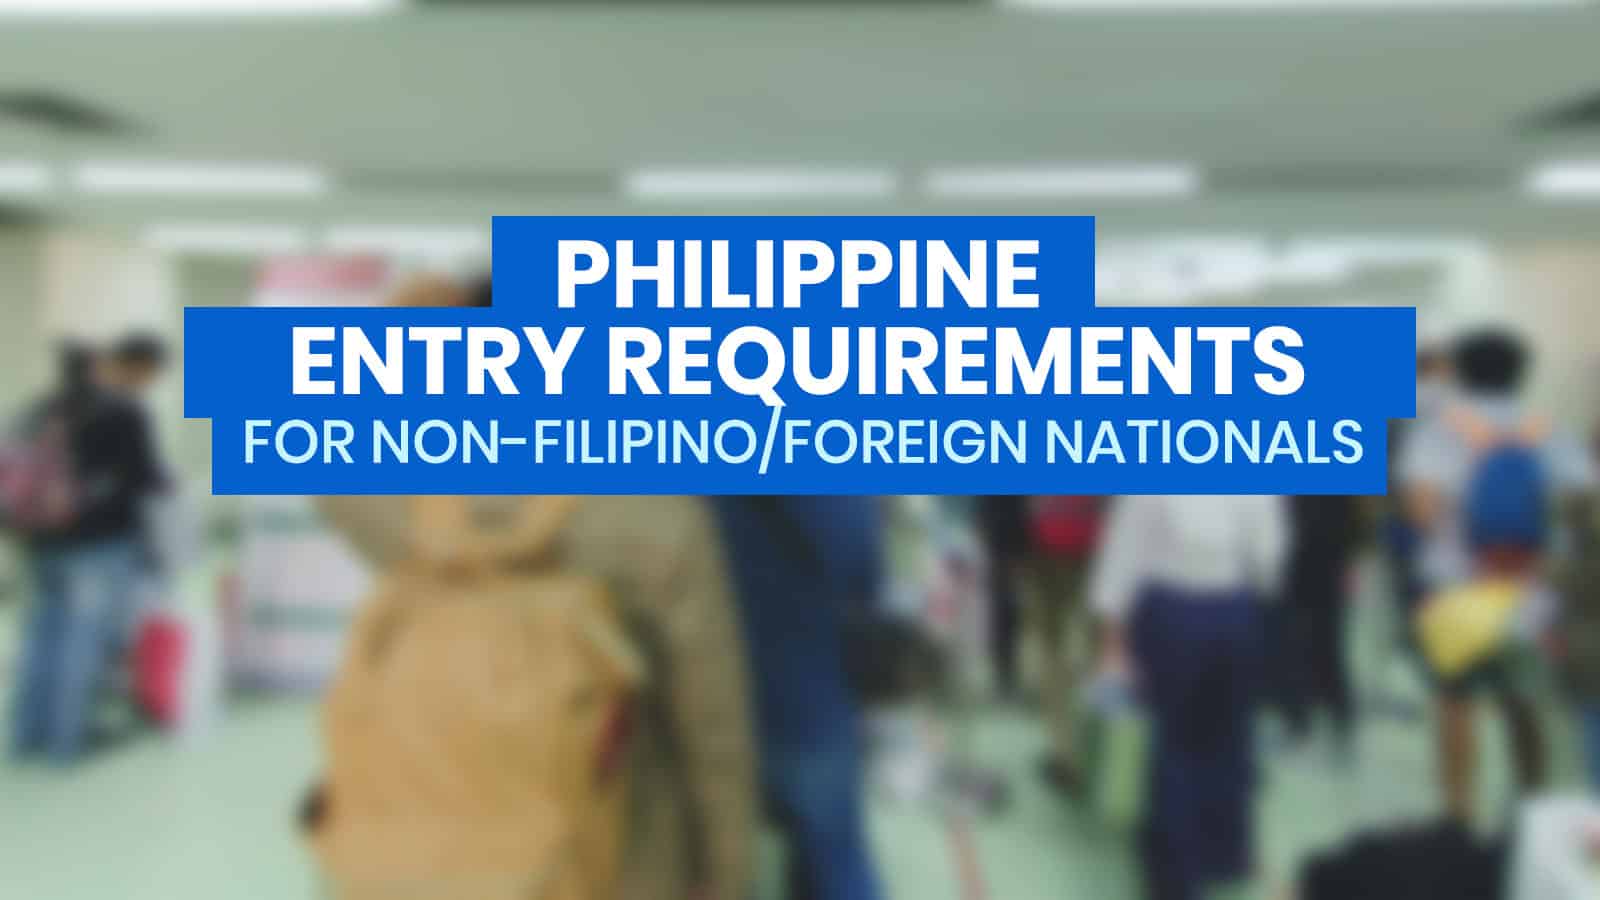 PHILIPPINE ENTRY REQUIREMENTS for FOREIGN NATIONALS / NON-FILIPINO